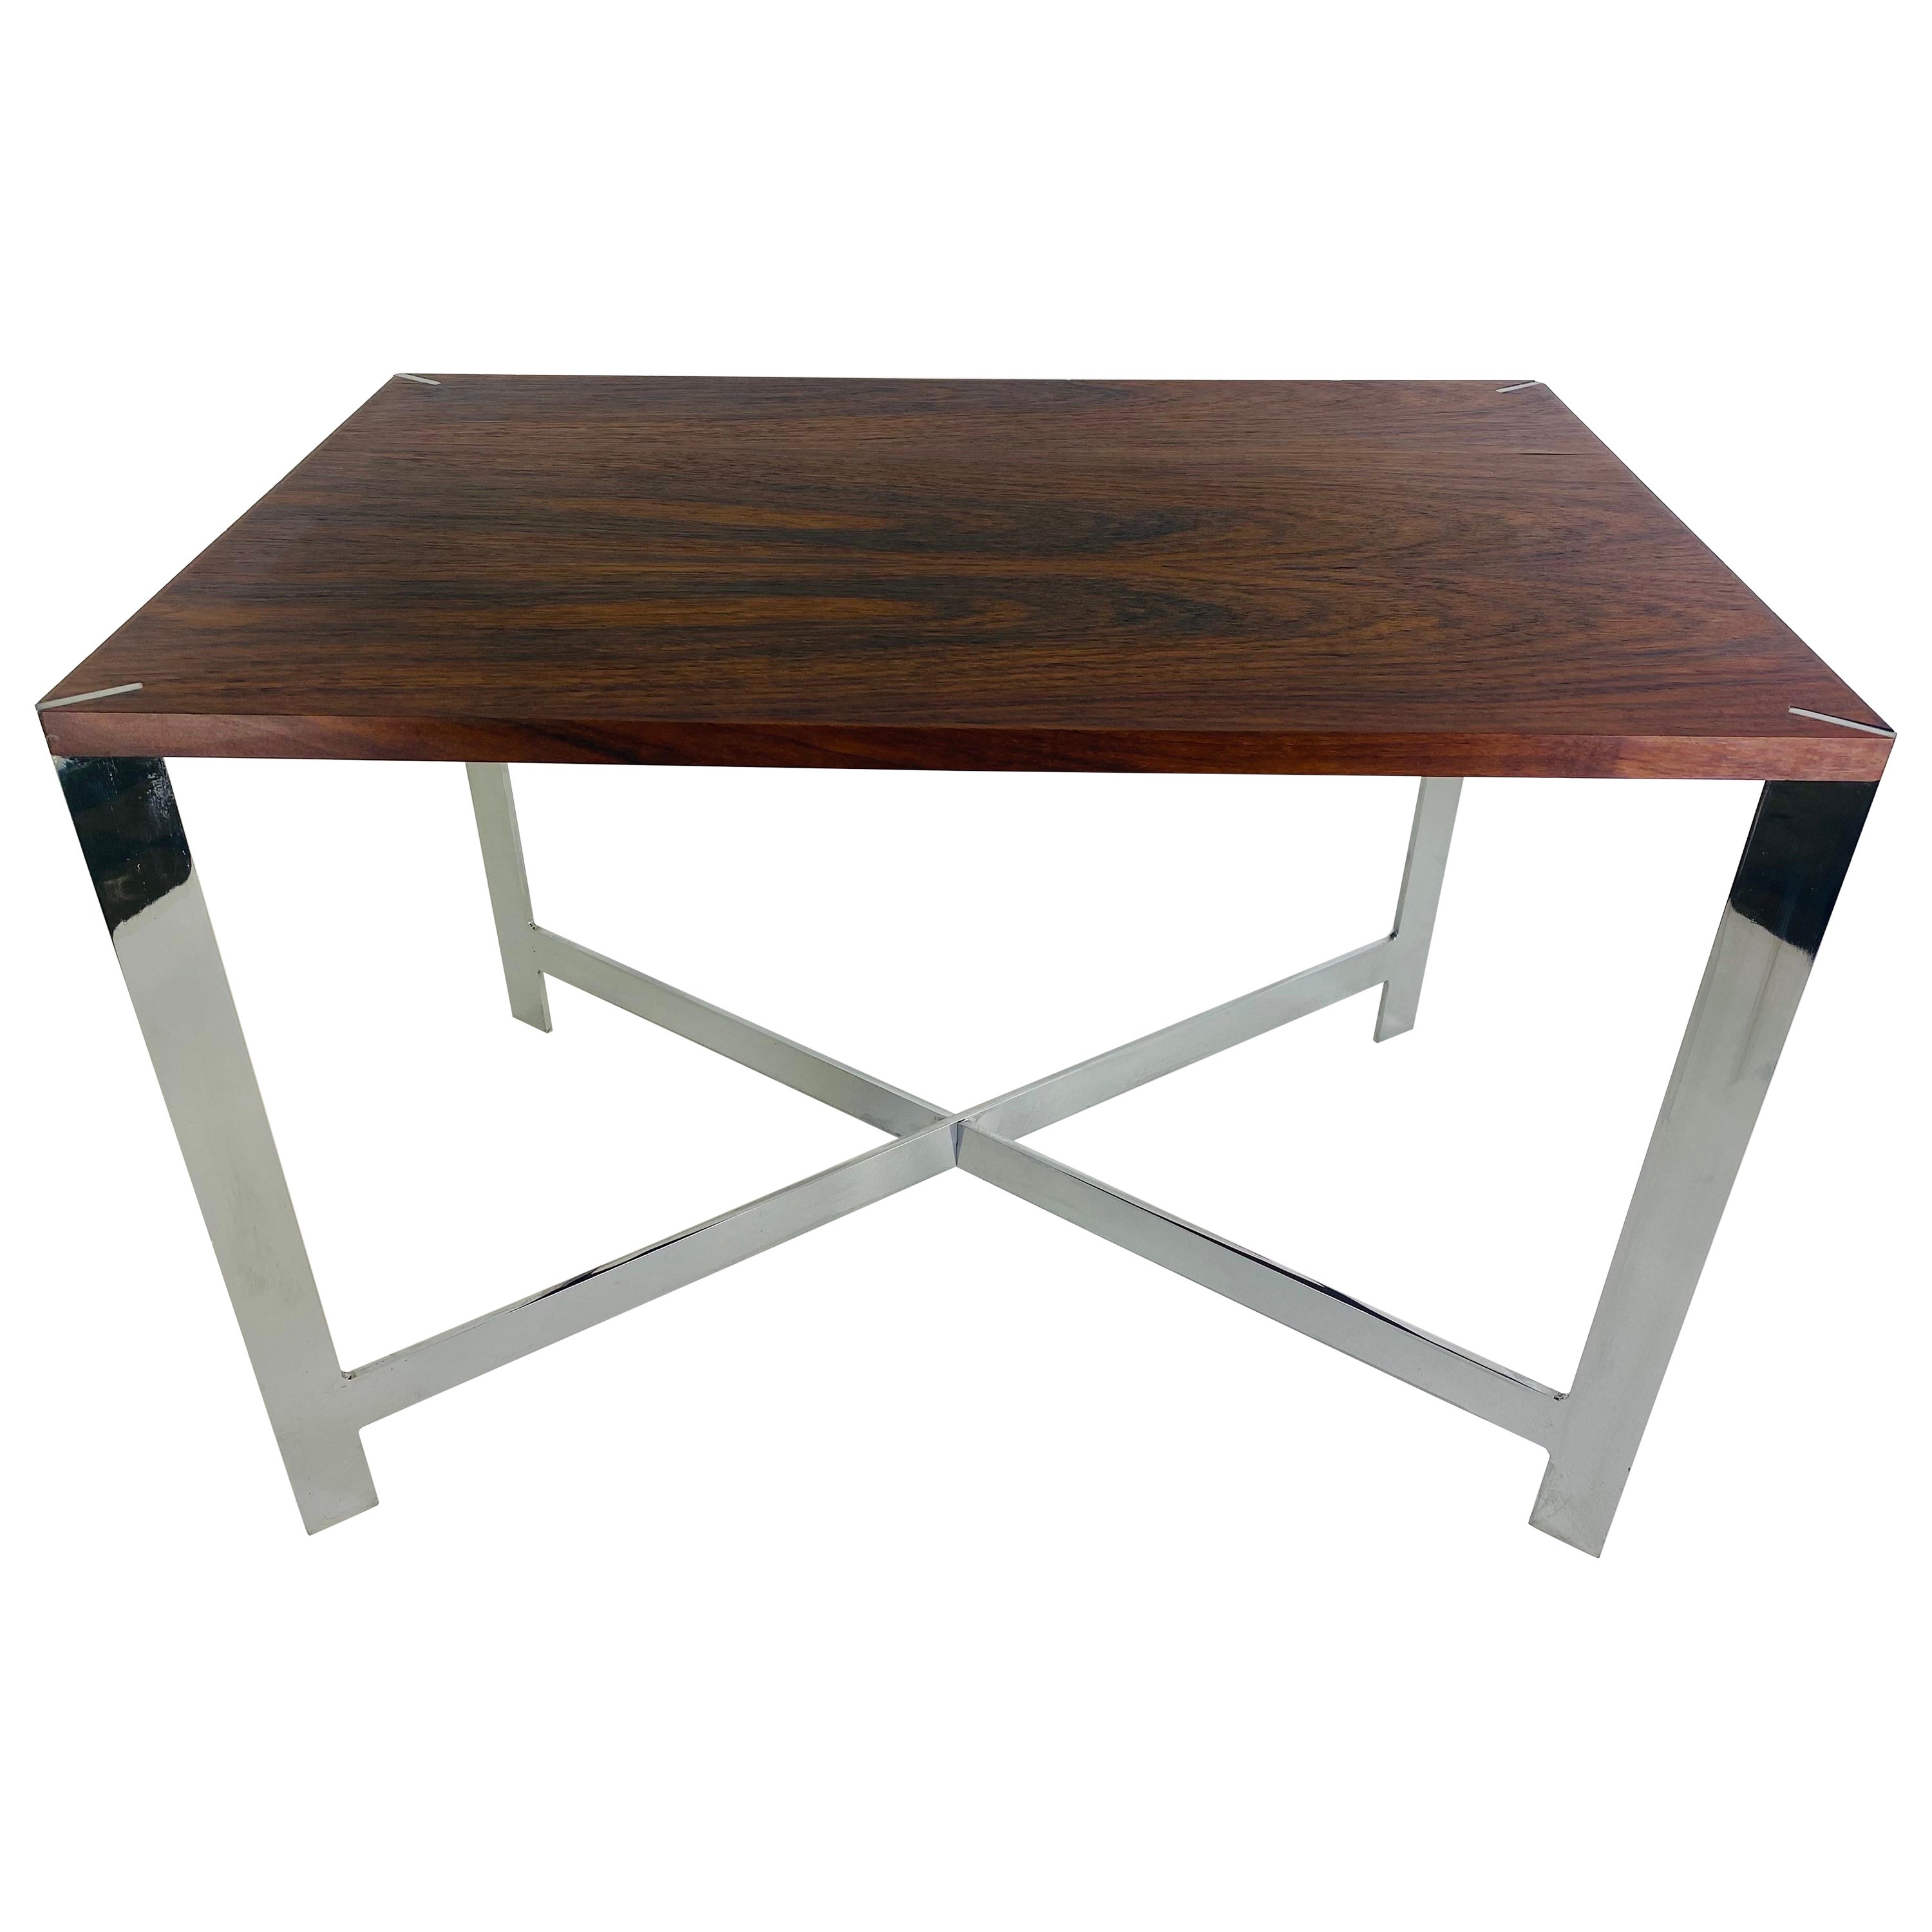 Milo Baughman for Lane furniture, Rosewood and chrome side table